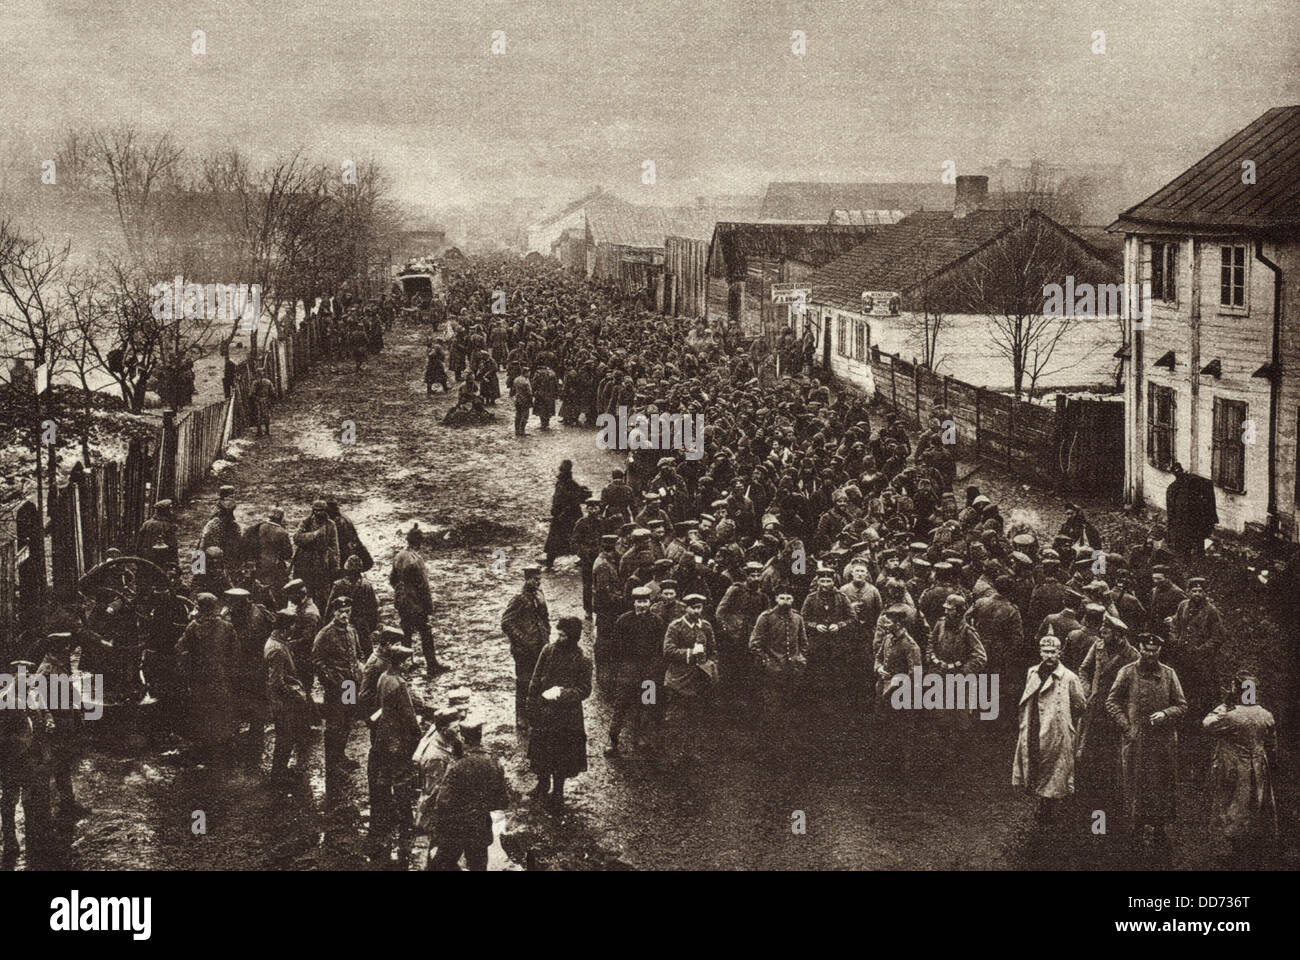 World War 1. Russian soldiers captured by the Germans at Tannenberg passing through a border town on the way to detention camps Stock Photo